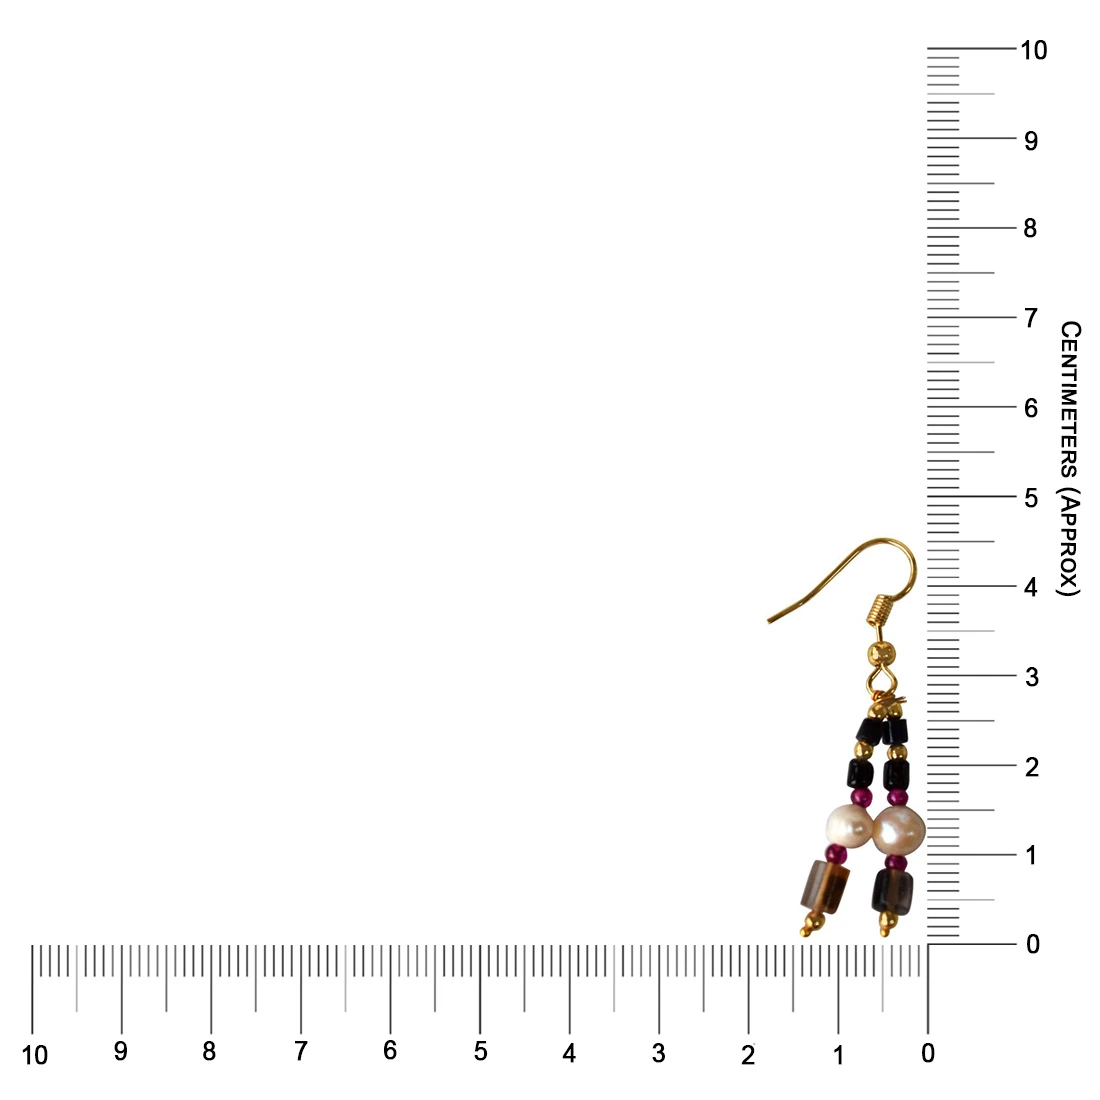 Black Onyx, Red Garnet, Gold Plated Beads and Freshwater Pearls Hanging Earrings for Women (SE339)